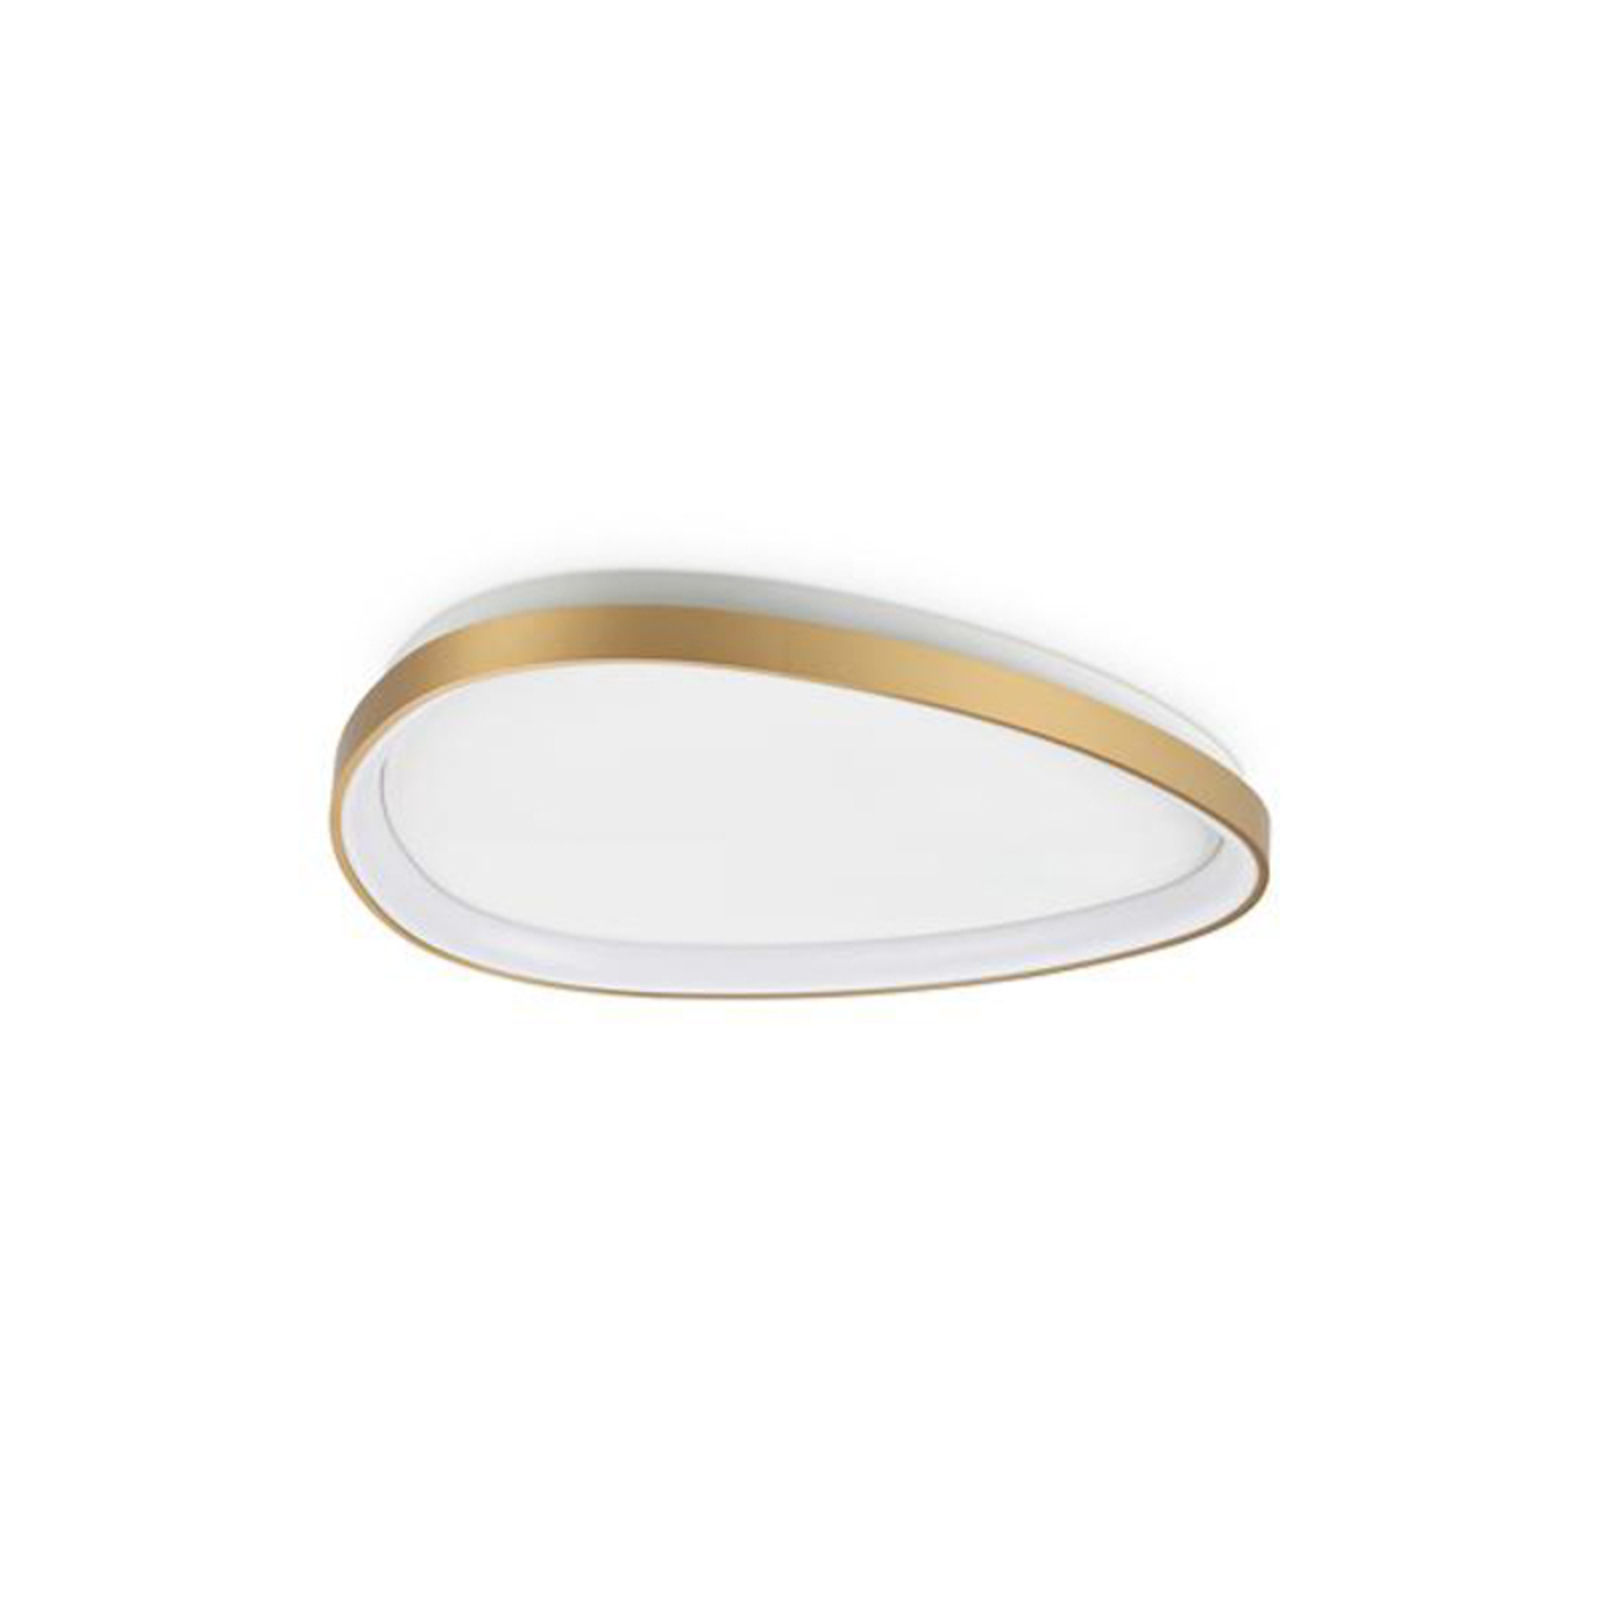 Ideal Lux Gemini LED ceiling lamp, brass-coloured, 61 cm on/off